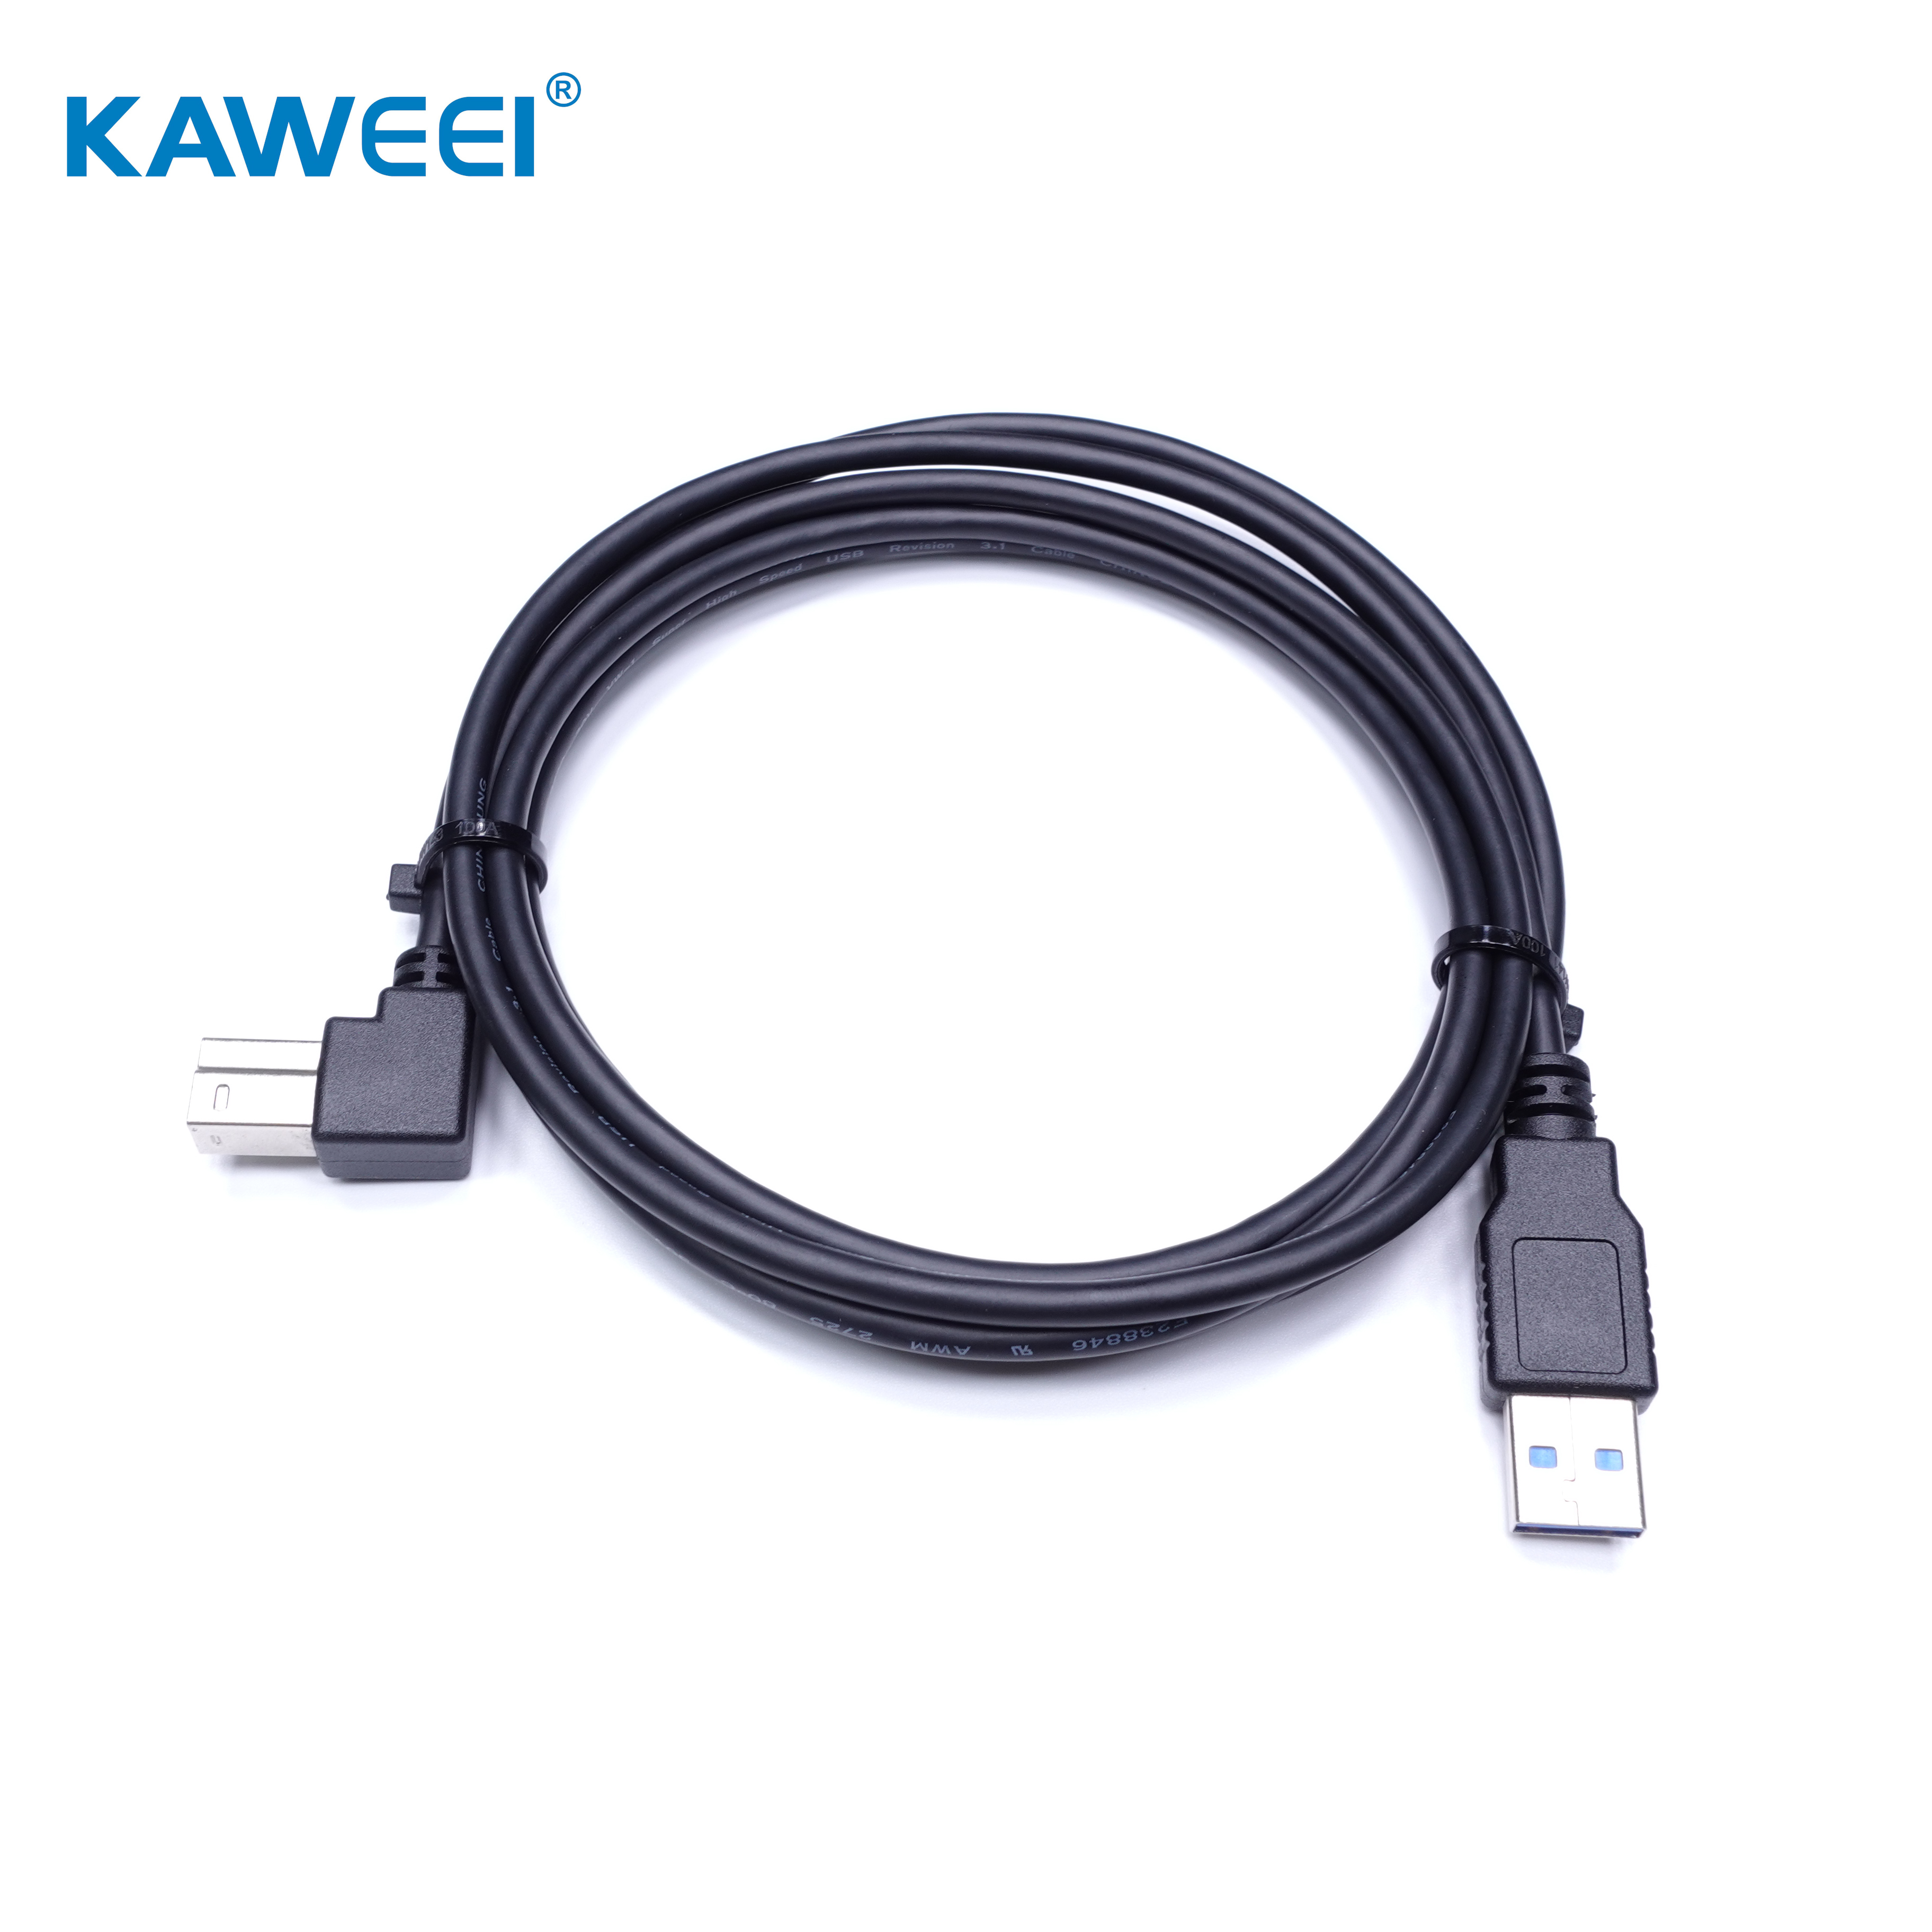 USB 3.0 Female to Male Cable Featured Image